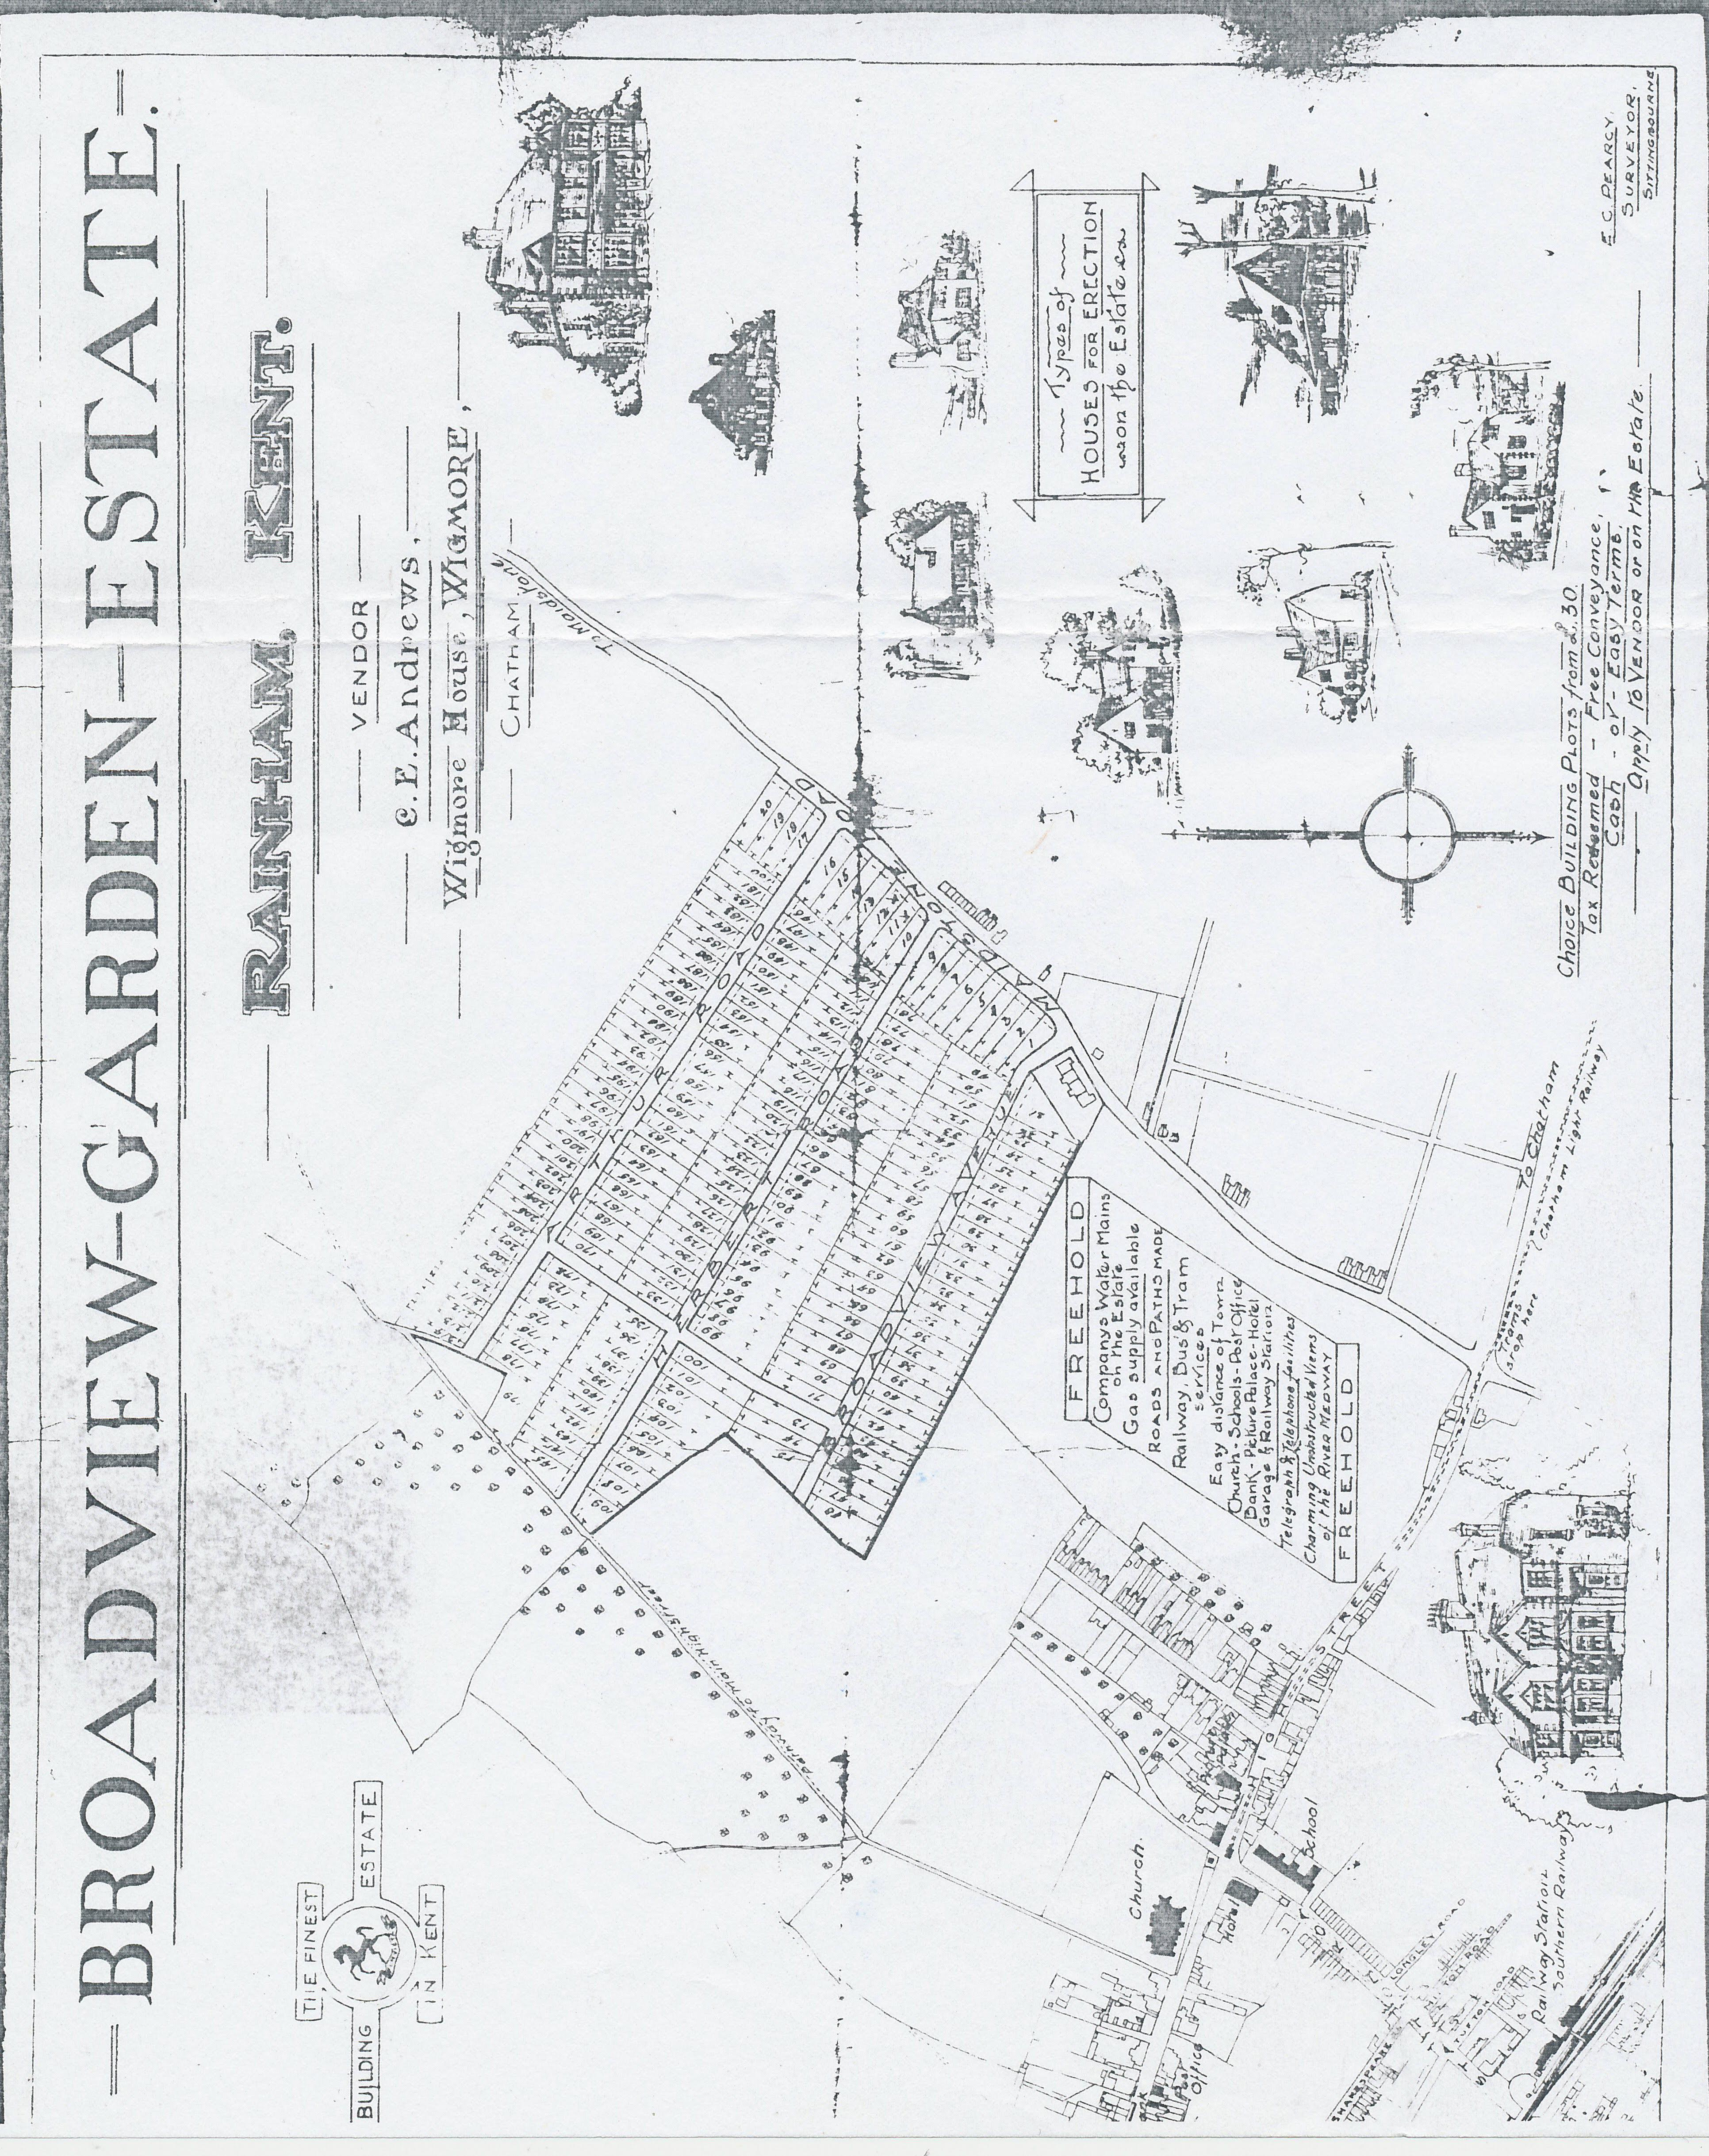 The history of Broadview Avenue/Arthur Road/Herbert Road dates back to the 1930s as can be seen from the plans below the grandly named Broadview Garden Estate 